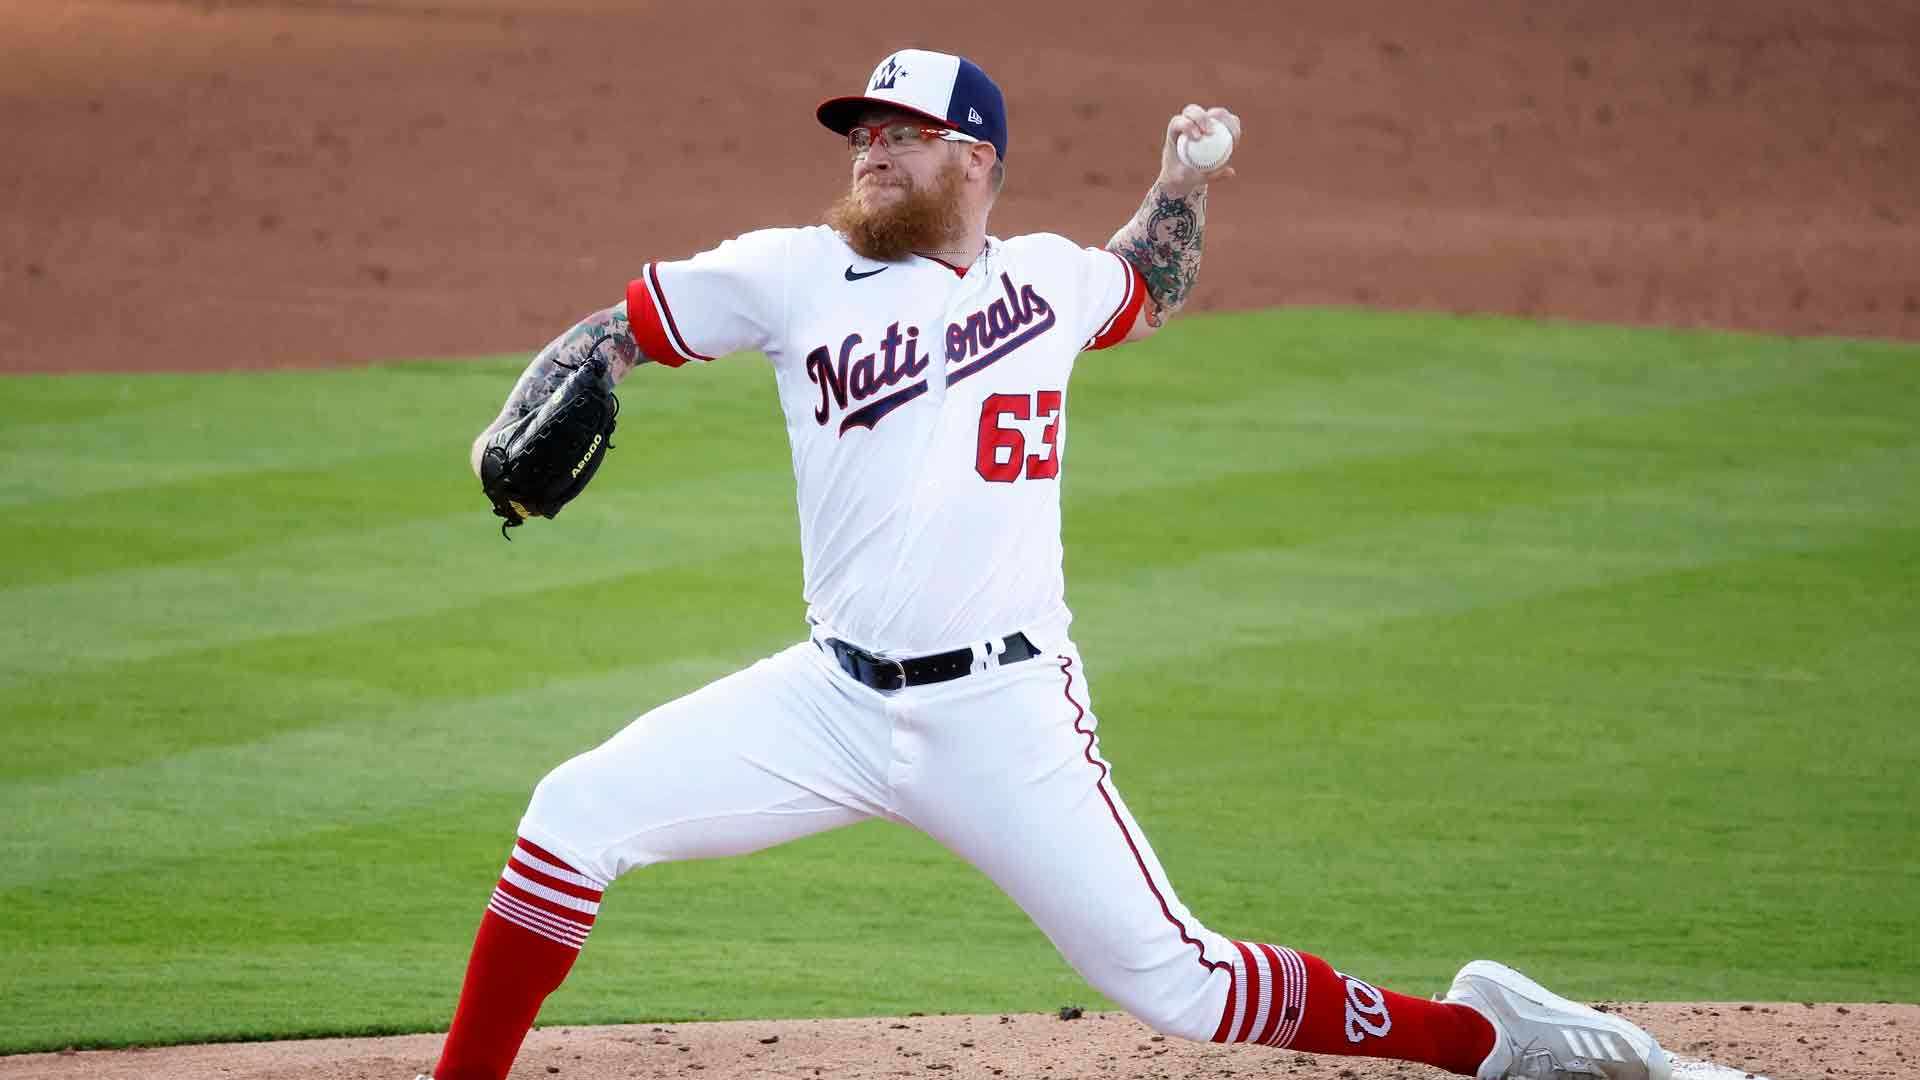 Ally and baseball pro Sean Doolittle wears Pride on his cleats